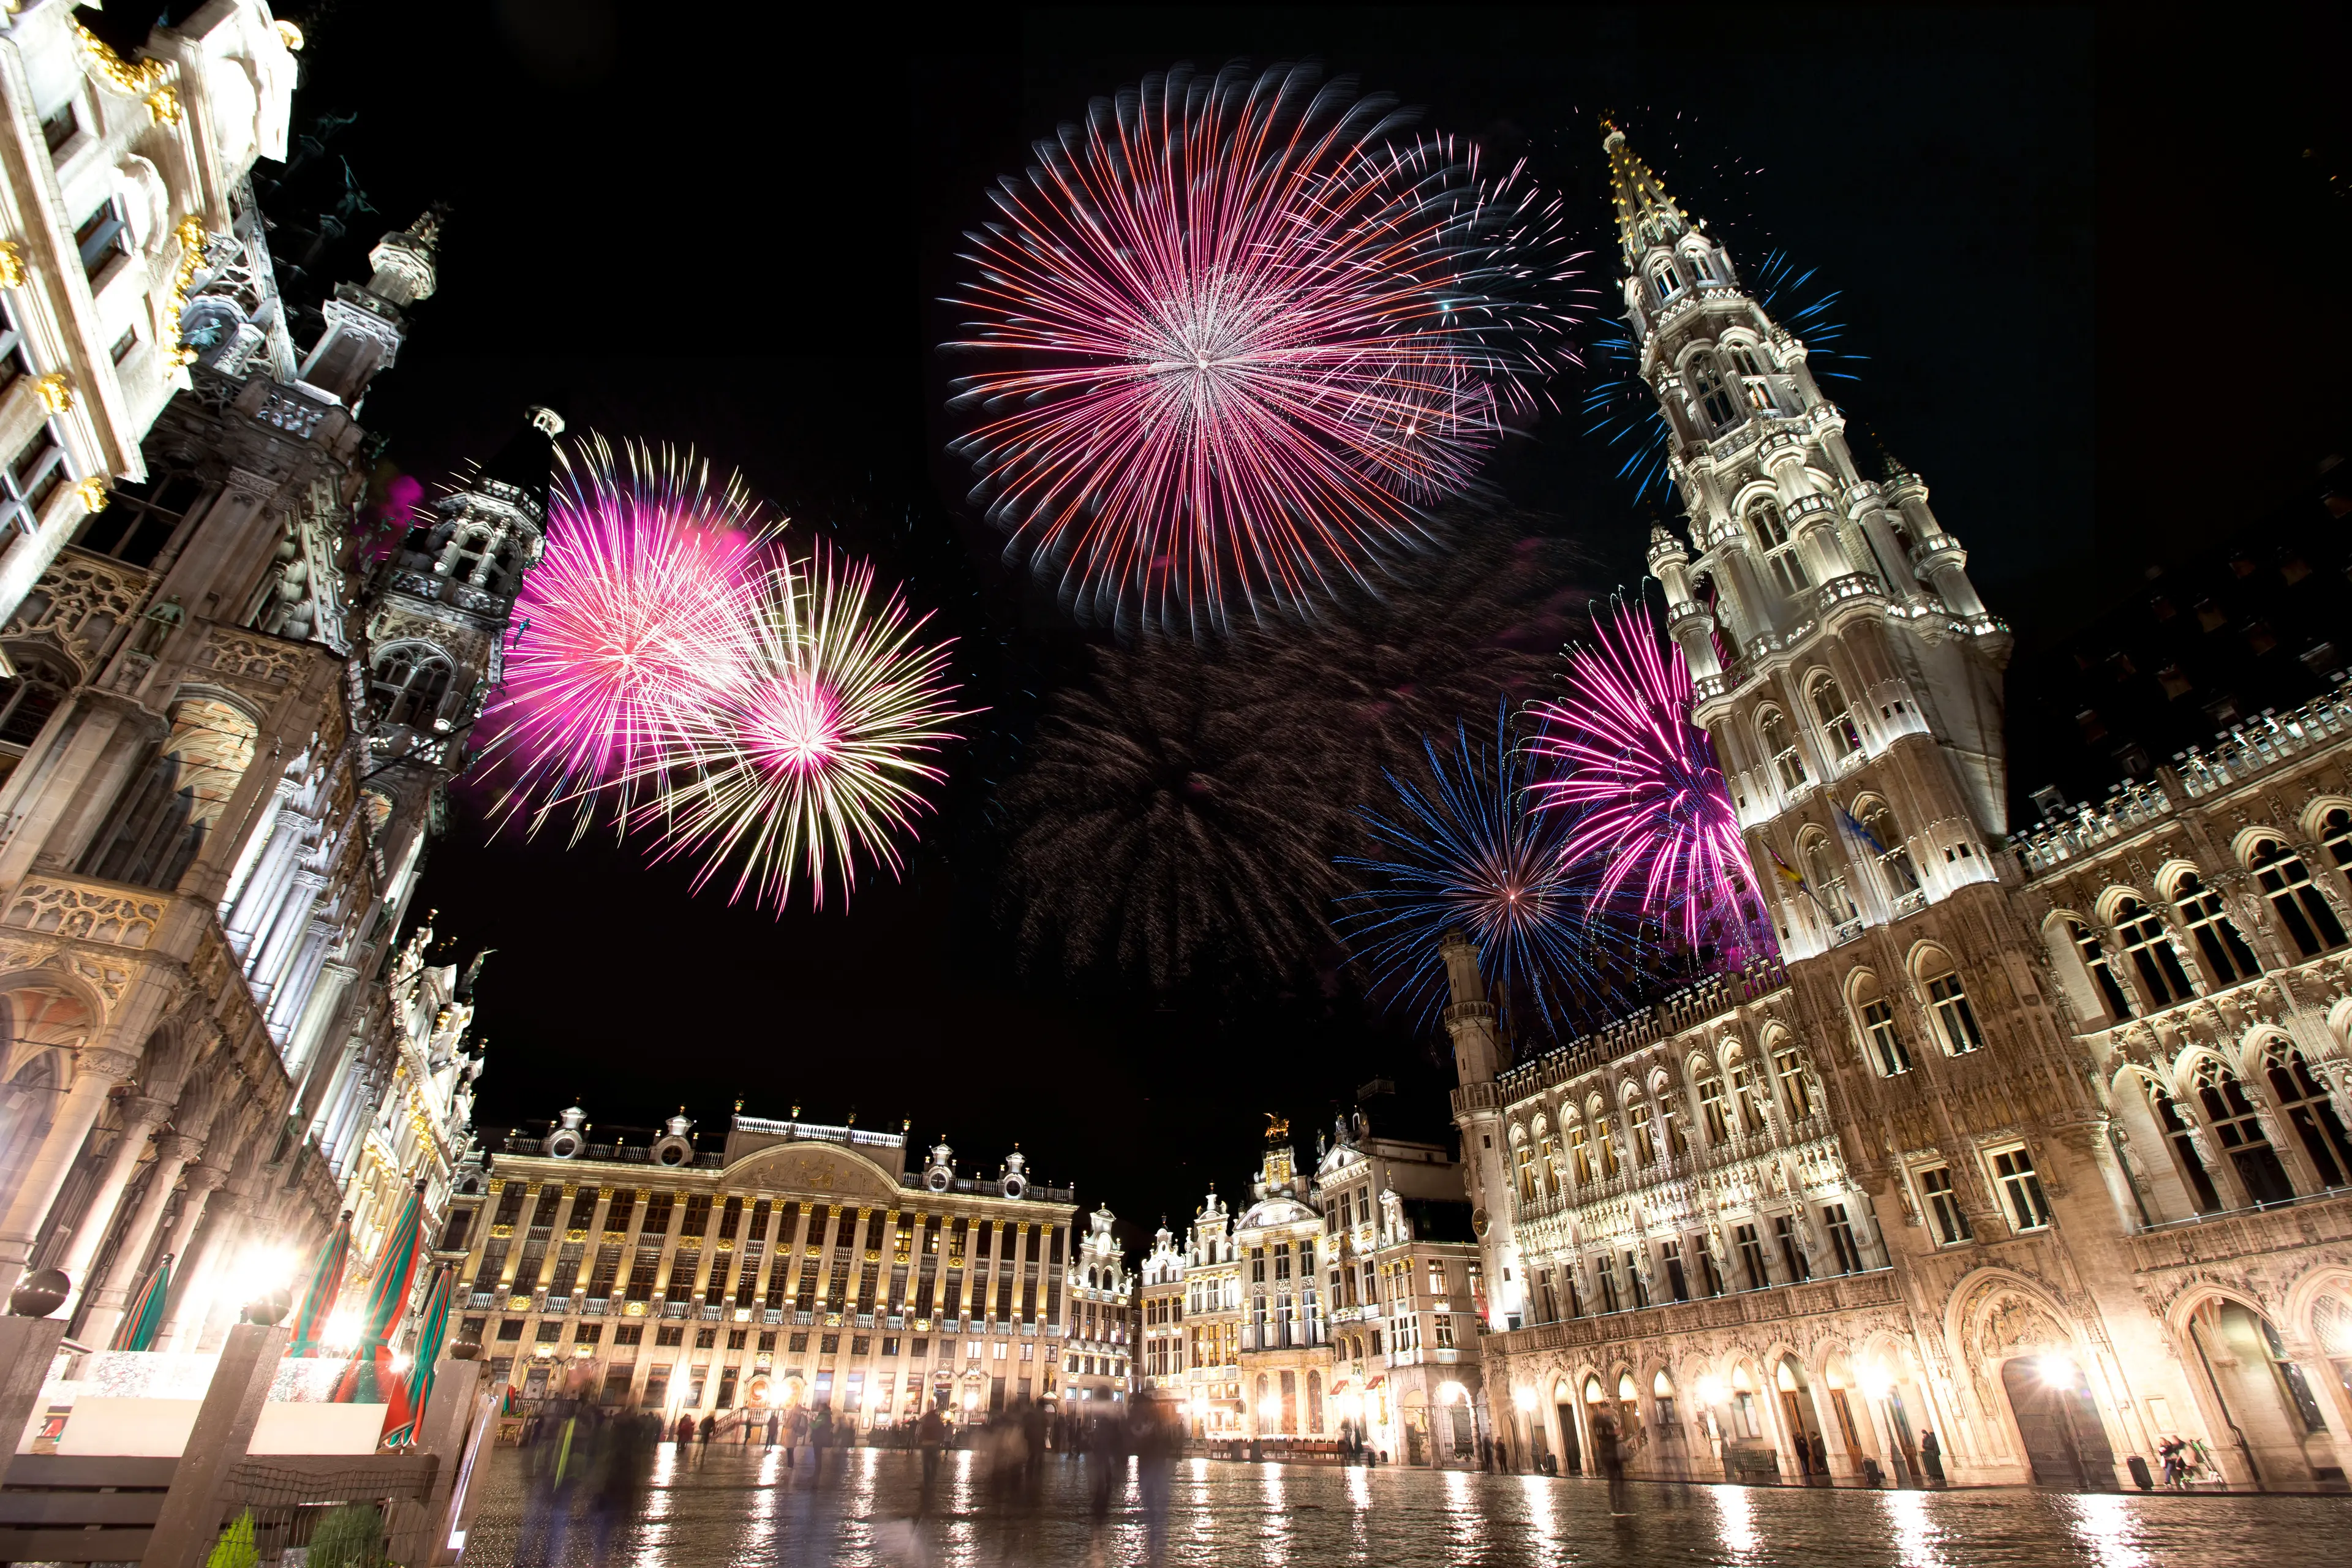 Celebratory fireworks for new year over Grand Place or Square